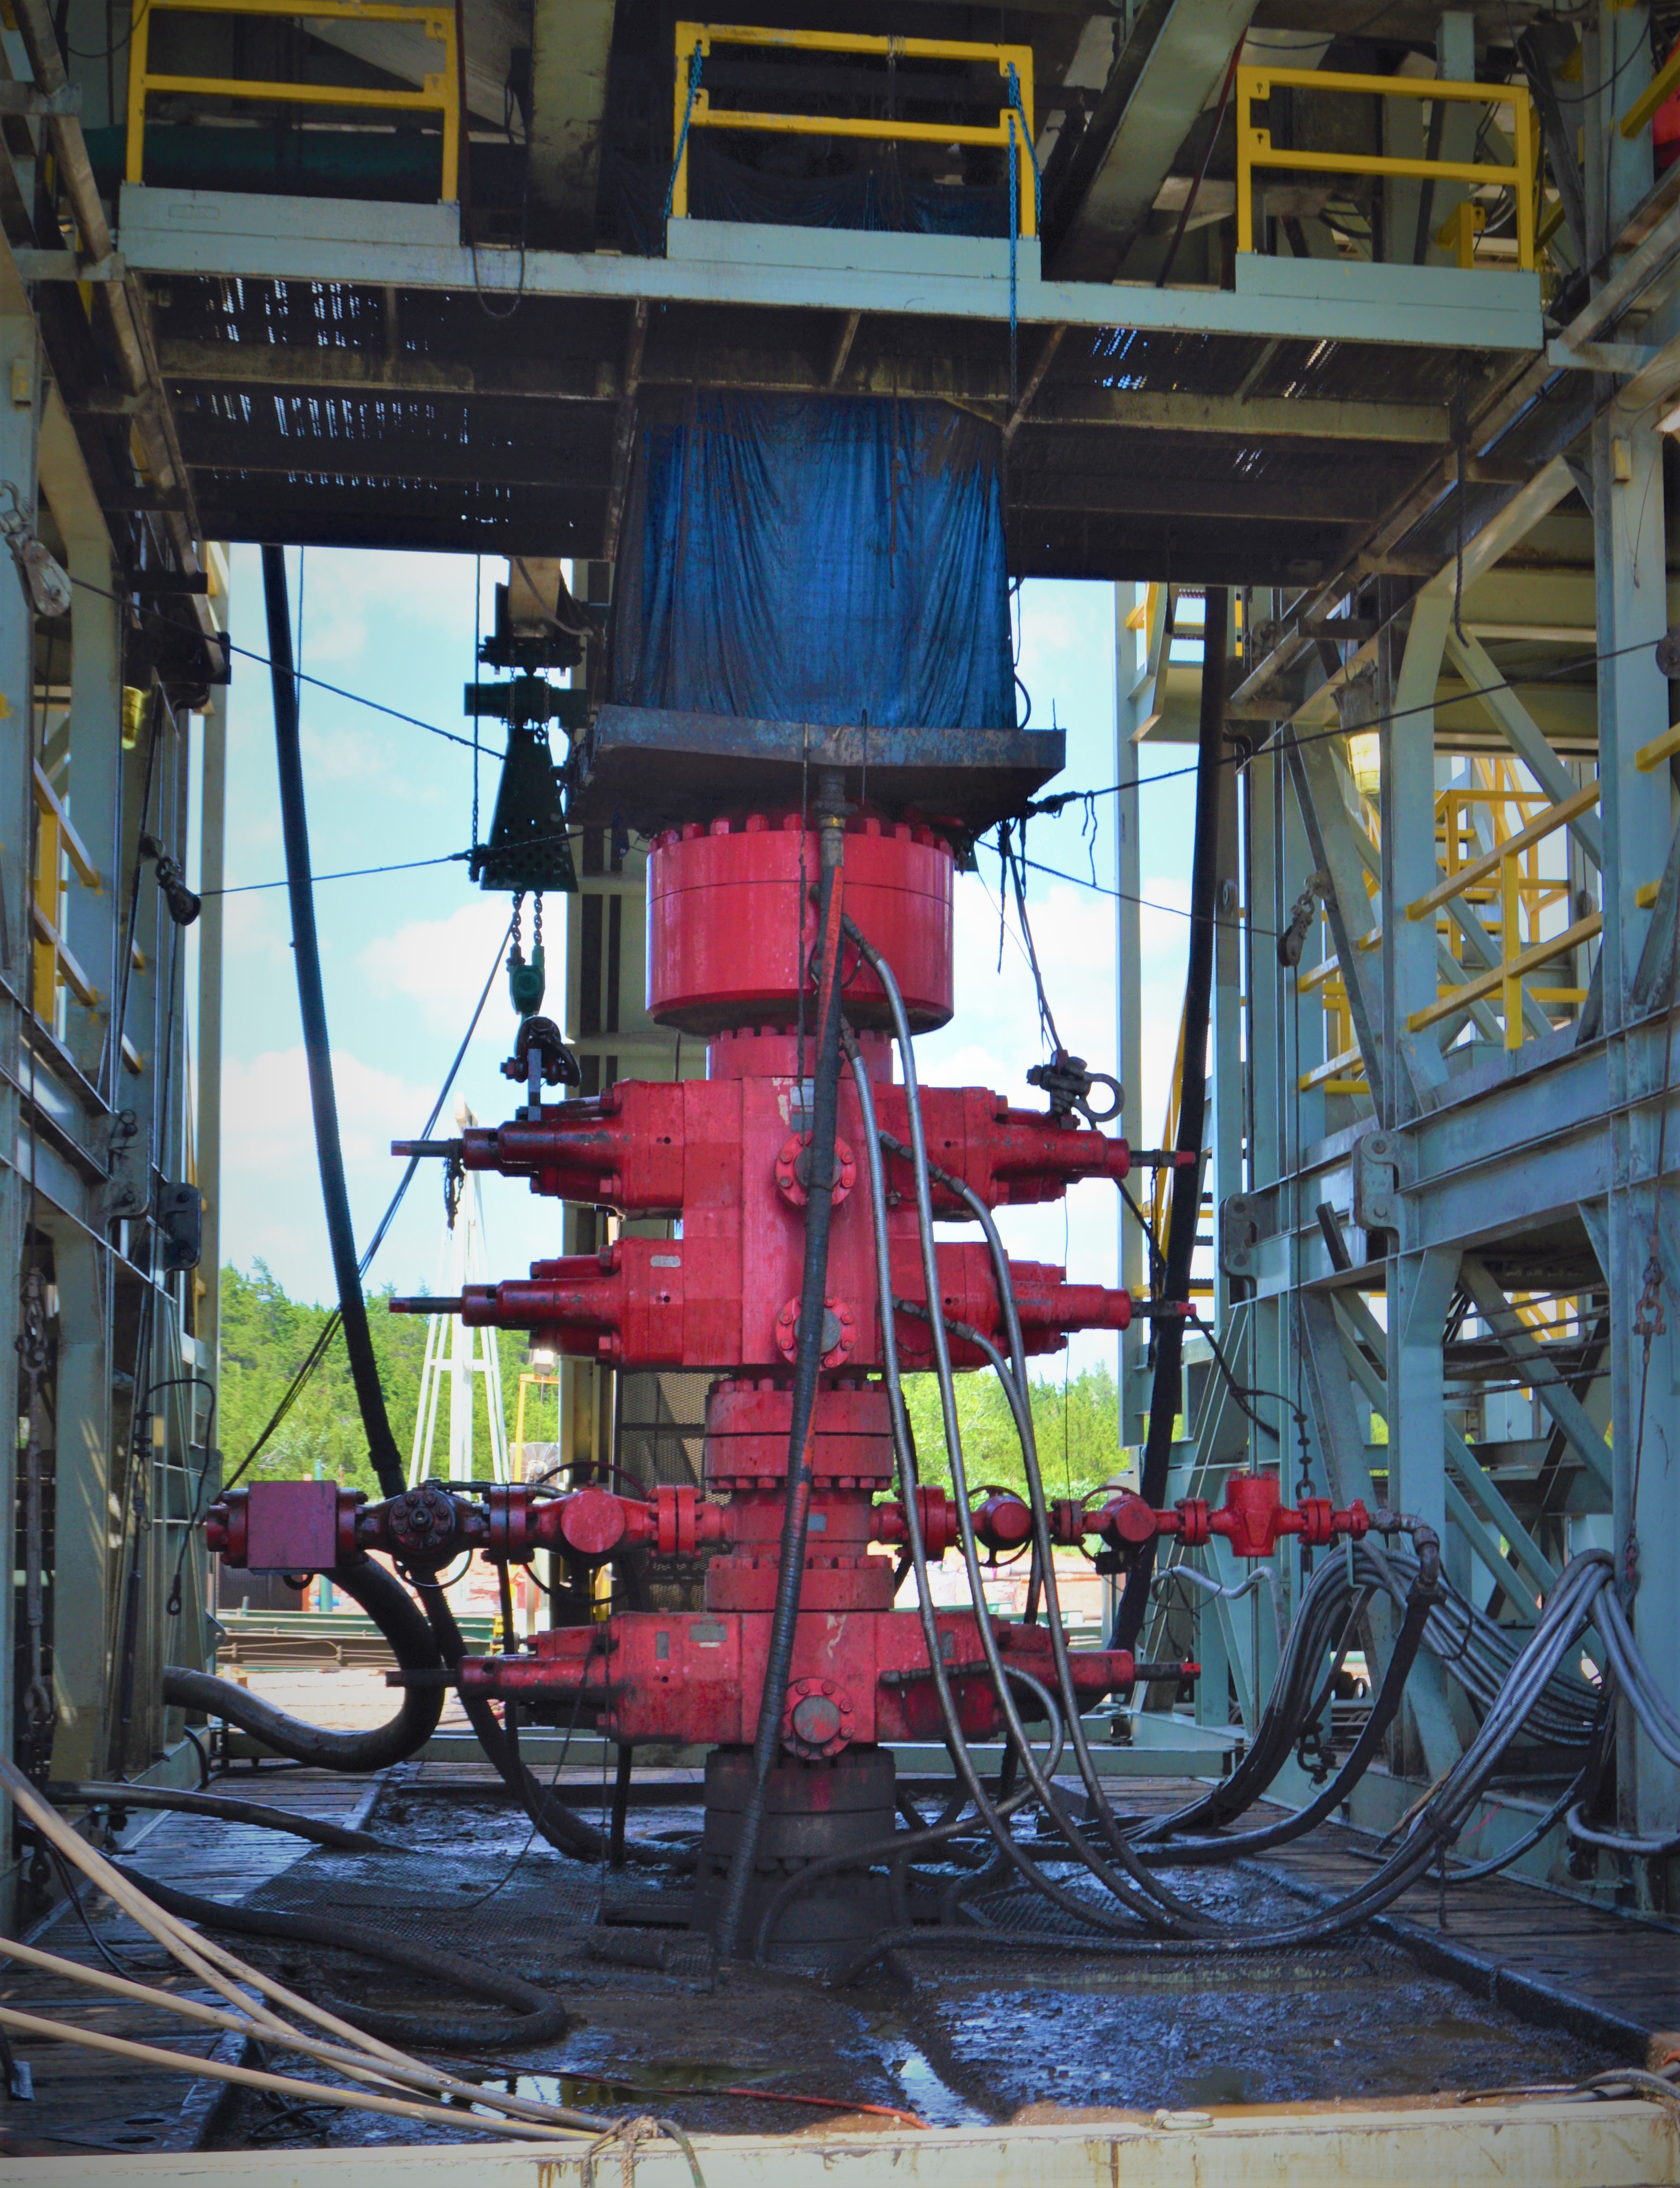 A blowout preventer at Camino’s Cora Mae 10-15-1H well, which is located in Grady County, Okla. Parent/child interactions pose challenges in the areas where Camino operates.